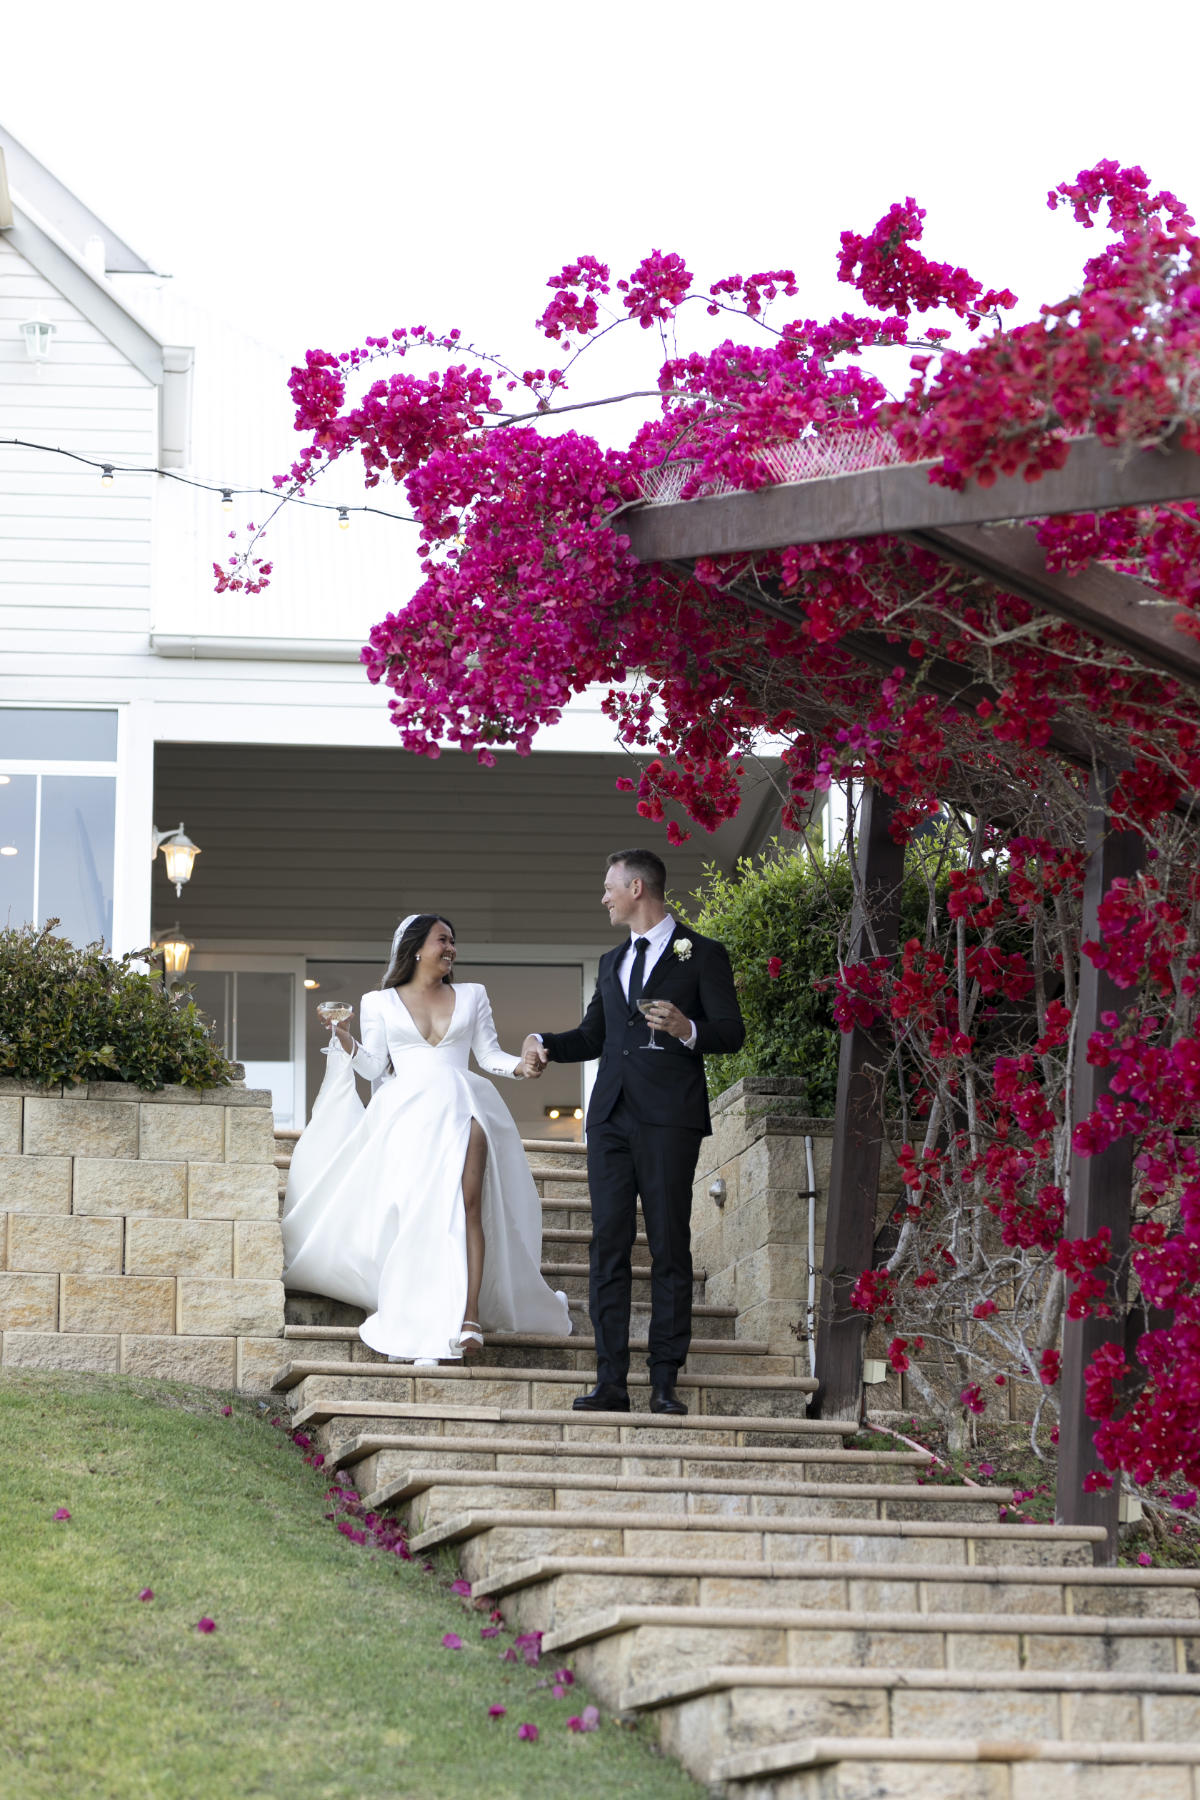 Som and Thomas' wedding at Maleny Manor photographed by Blumenthal Photography